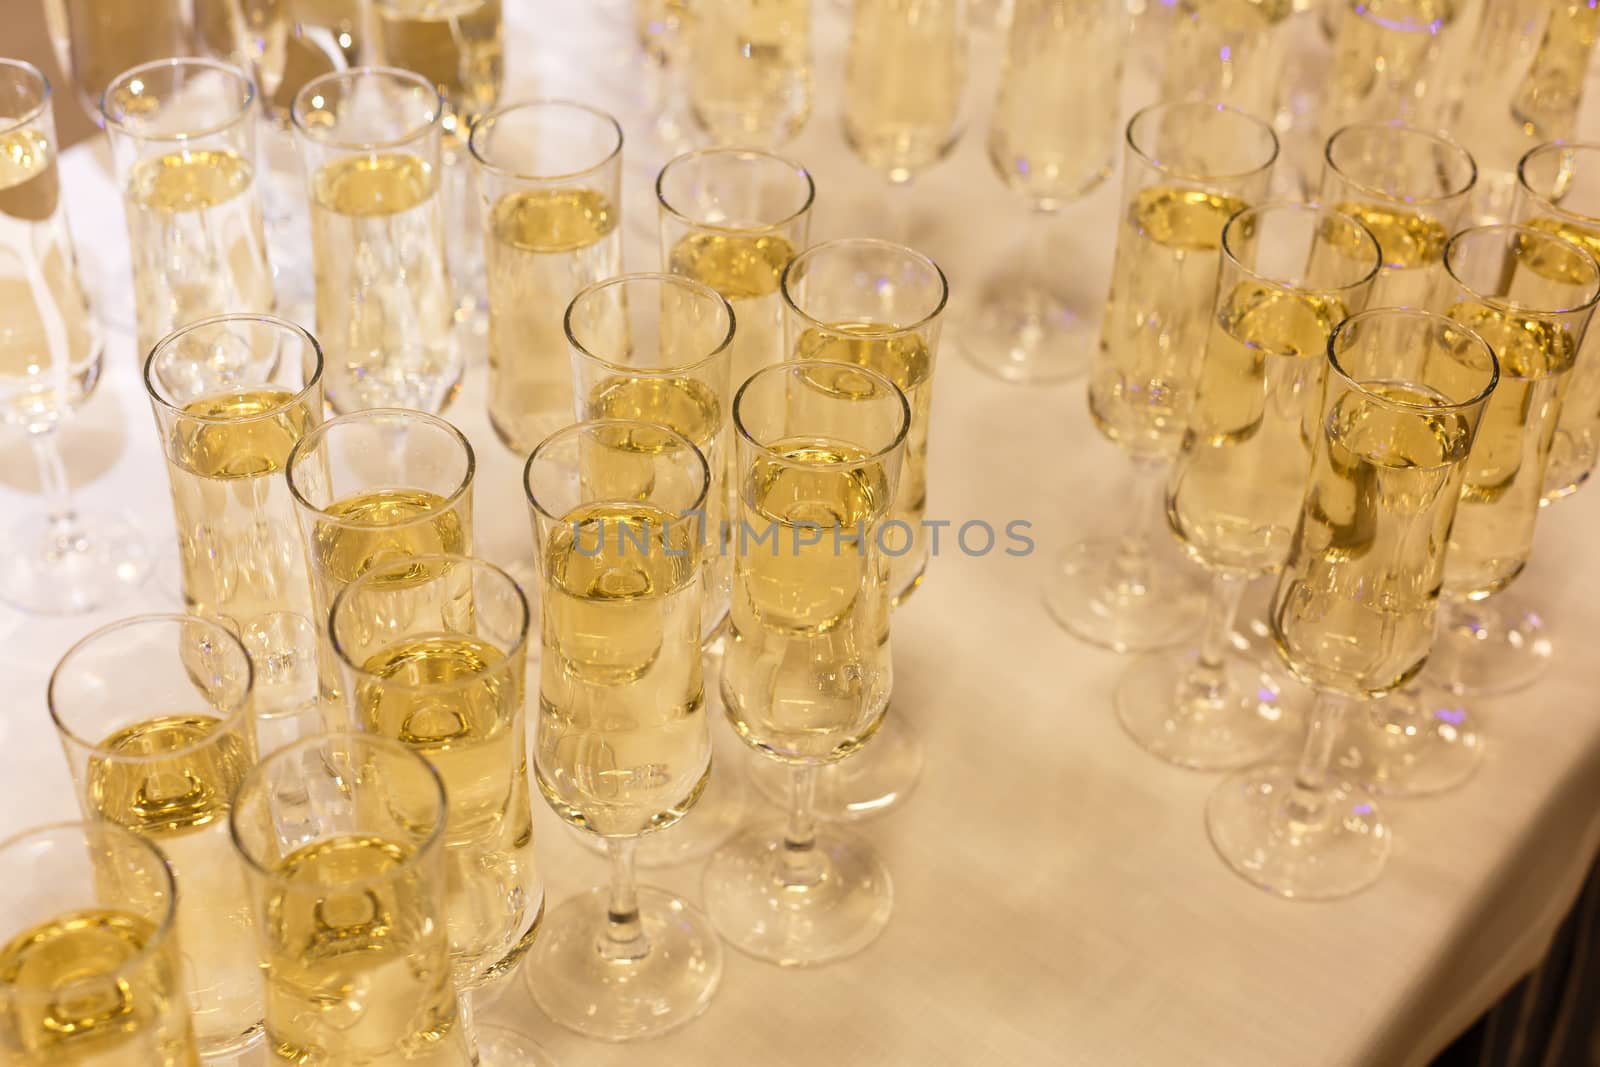 A table filled with wine glasses. High quality photo